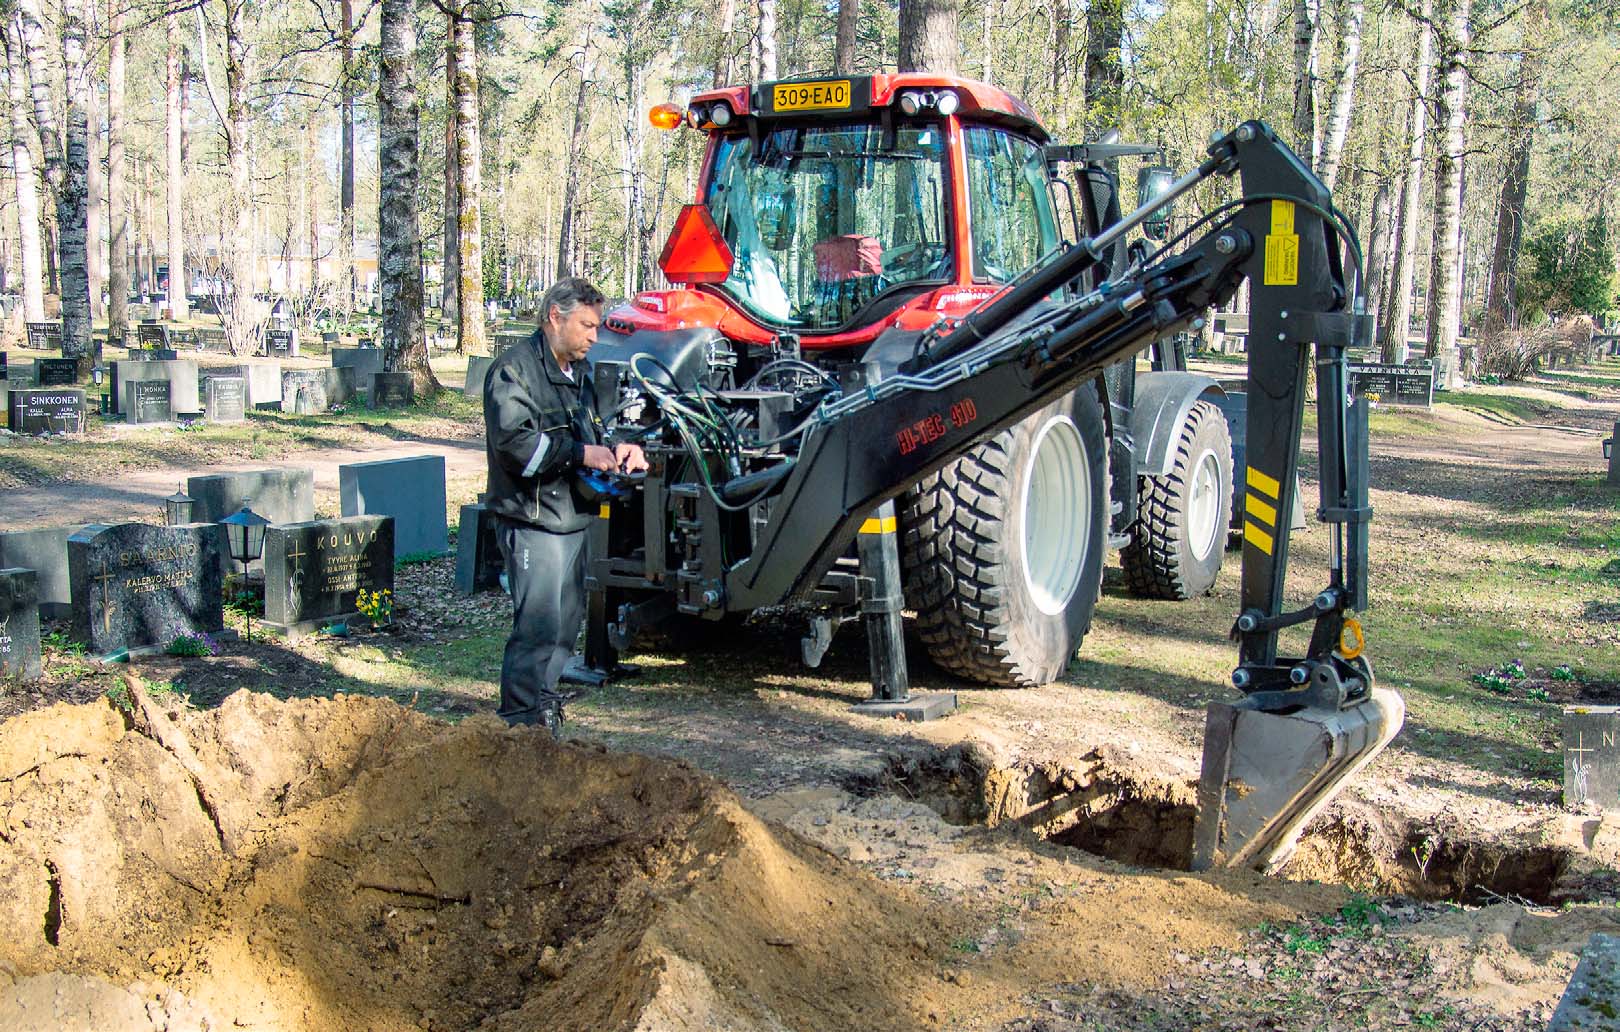 Valtra N104 digs burial plots by remote control